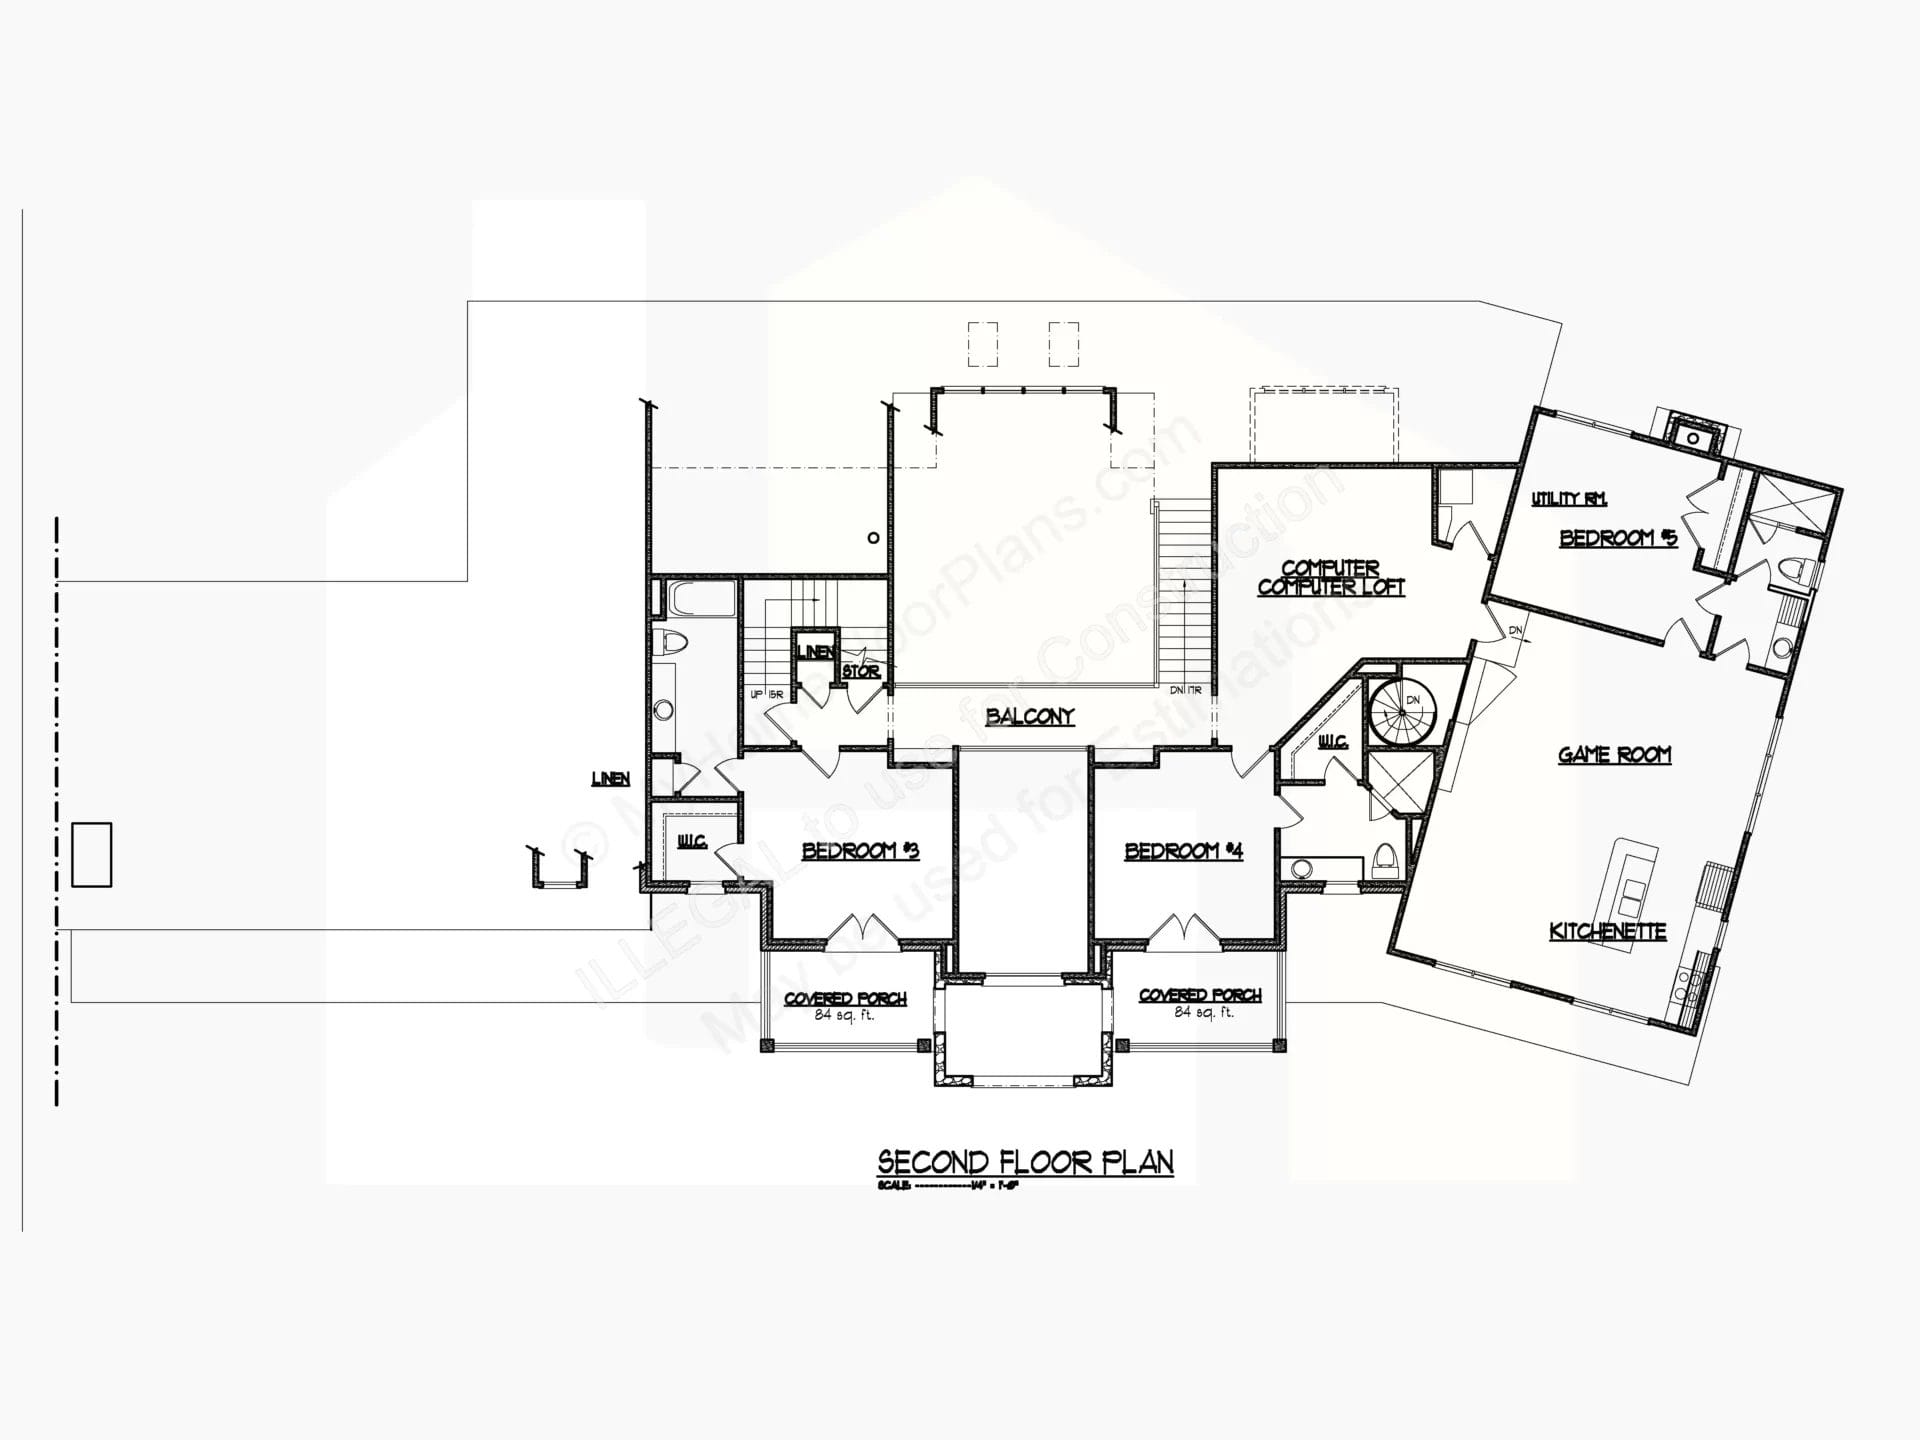 Architectural design of a second-floor plan for a home featuring layout details including three bedrooms, a game room, a computer space, two bathrooms, and a balcony. Labels and measurements are clearly indicated for the 9-1840.